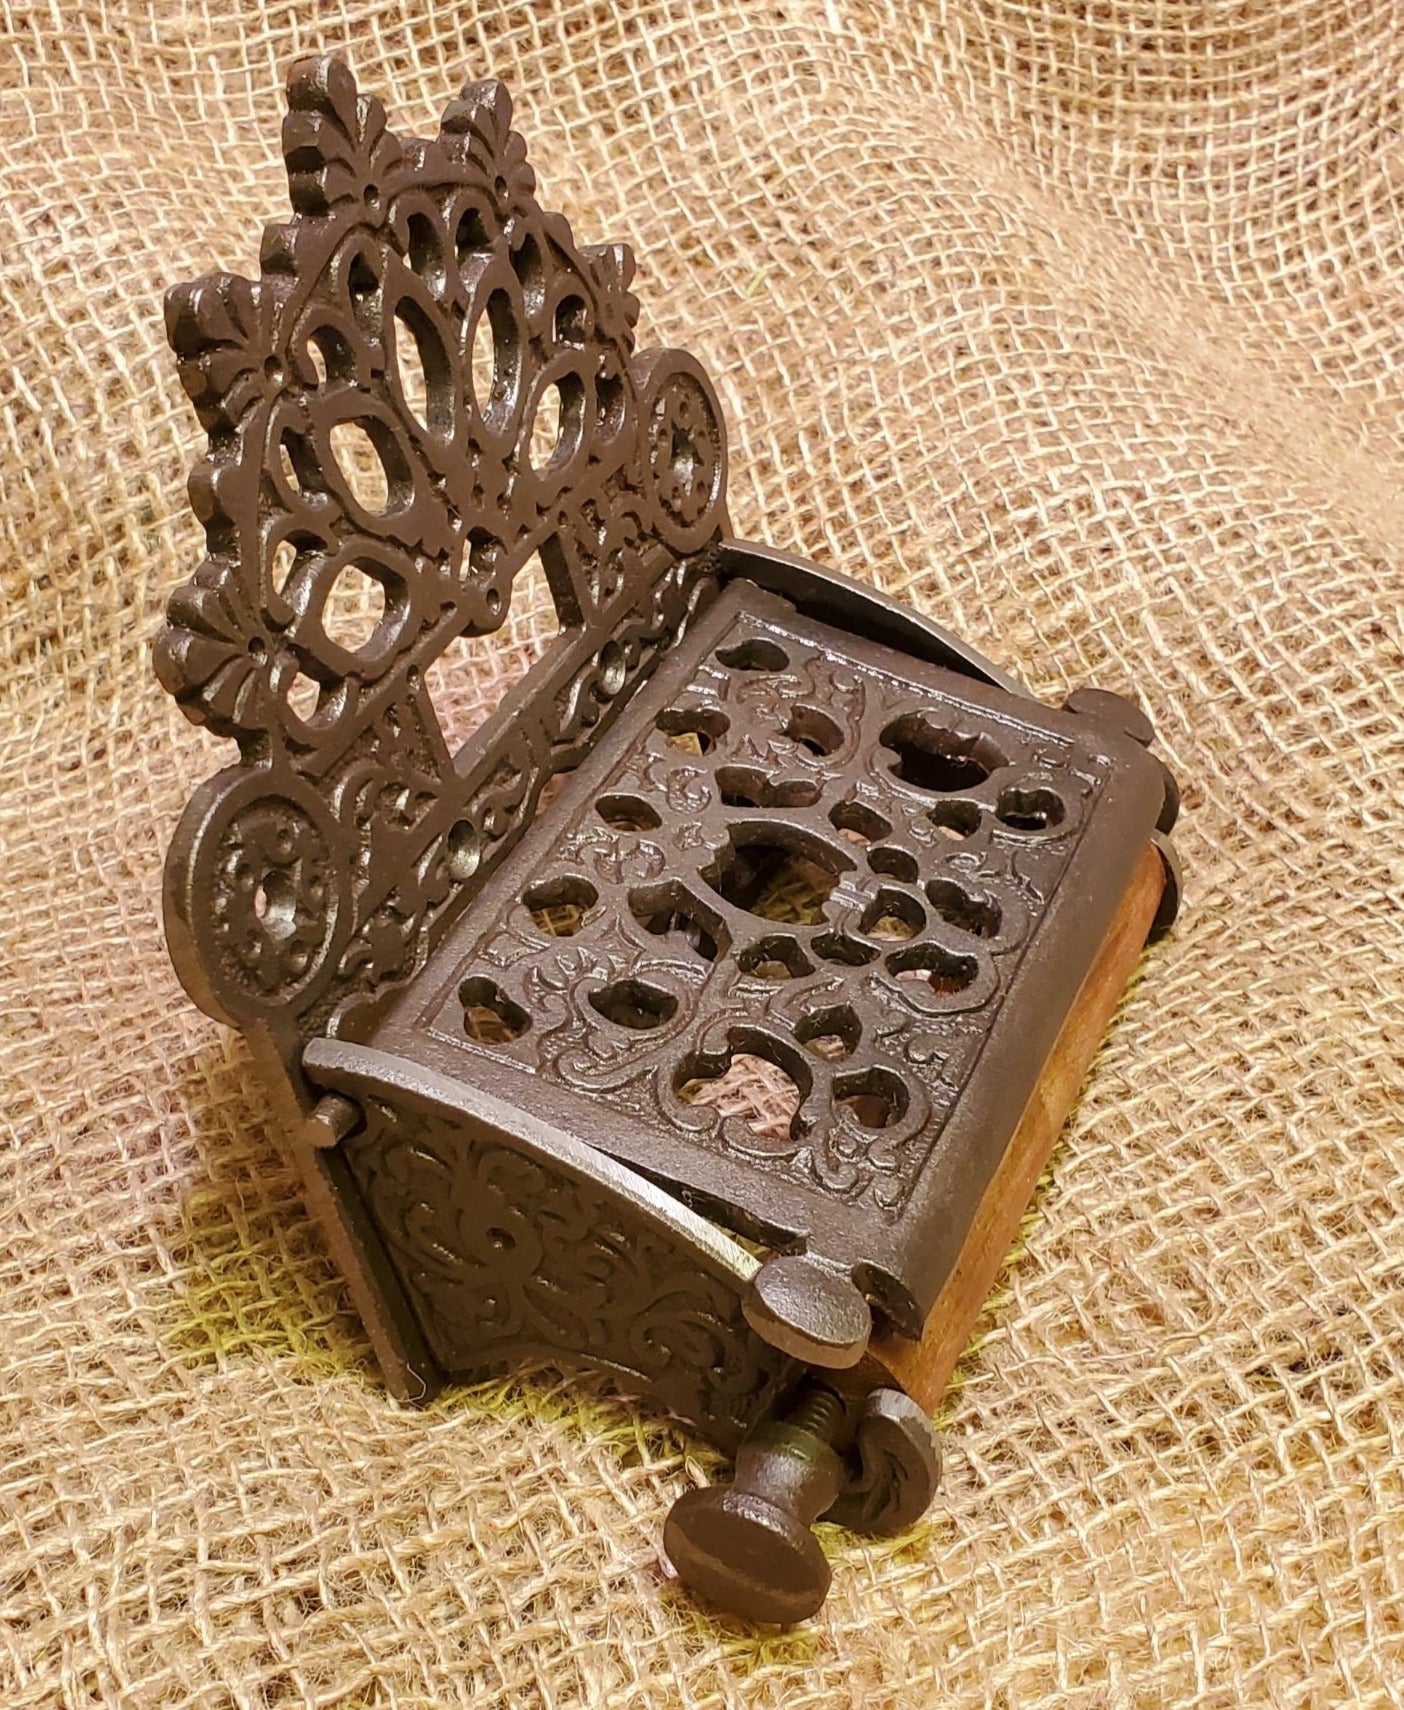 Victorian with Lid Antique Iron - Toilet Paper Holder - Spearhead Collection - Toilet Paper Holders - Bathroom Decor, Home Decor, Interior Decor, Toilet Paper Holders, Victorian